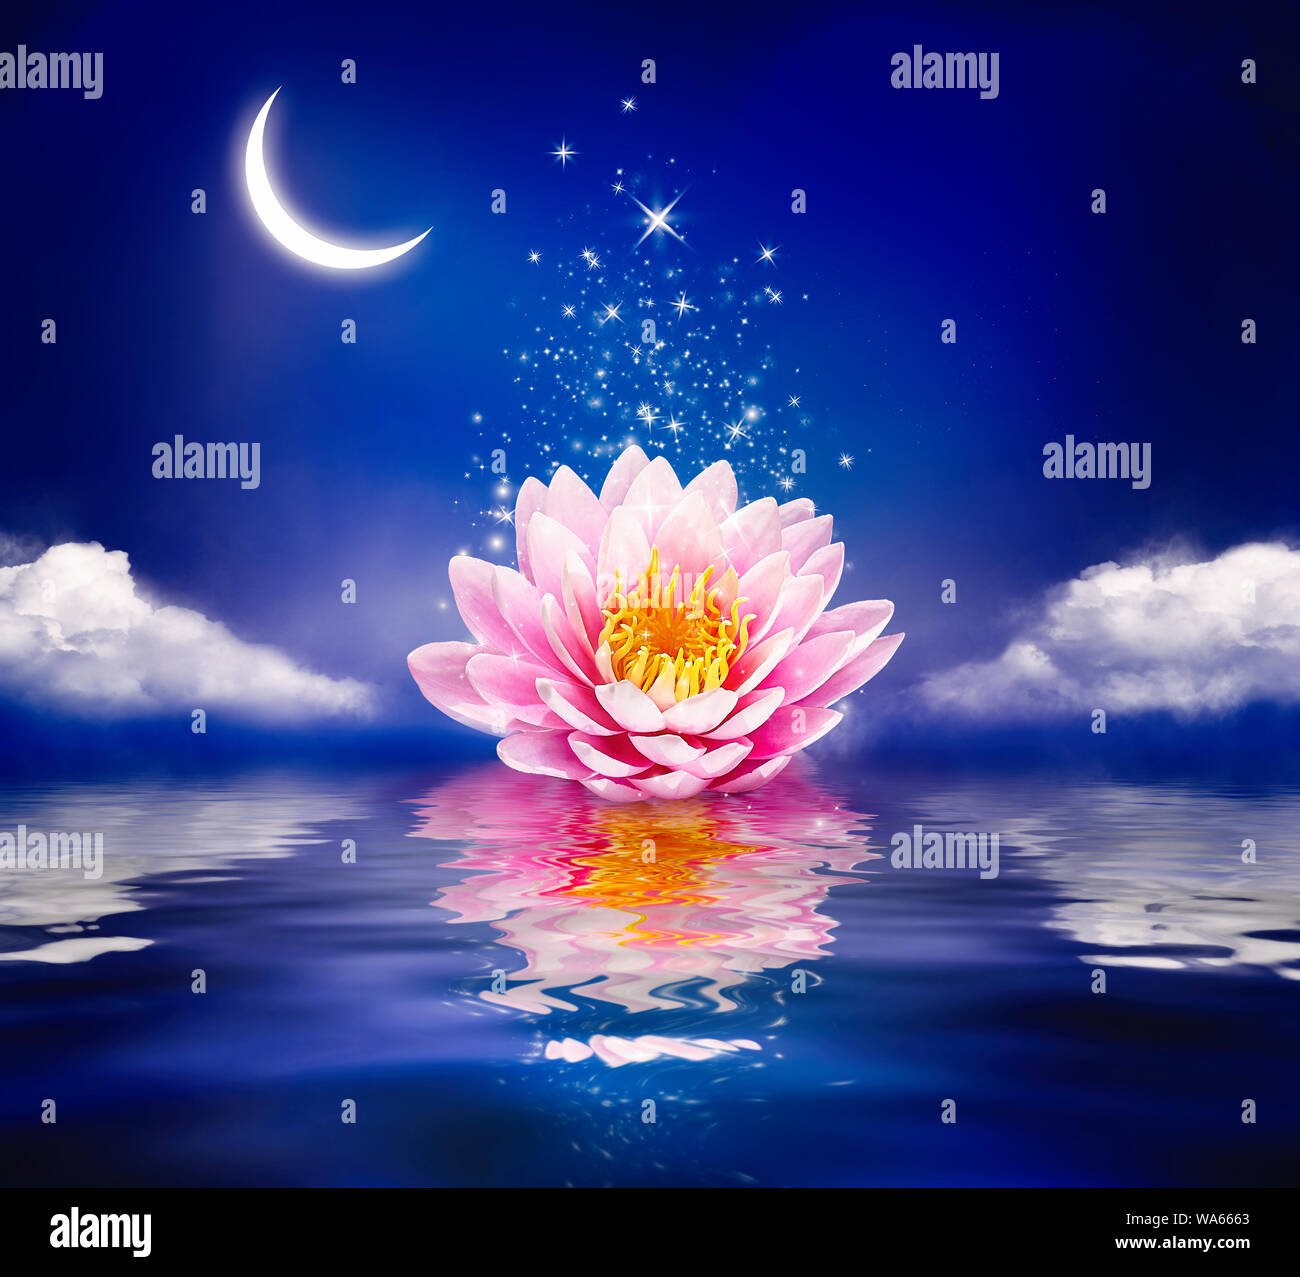 Beautiful magic flower on water. Waterlily or lotus and moon in night. Stock Photo